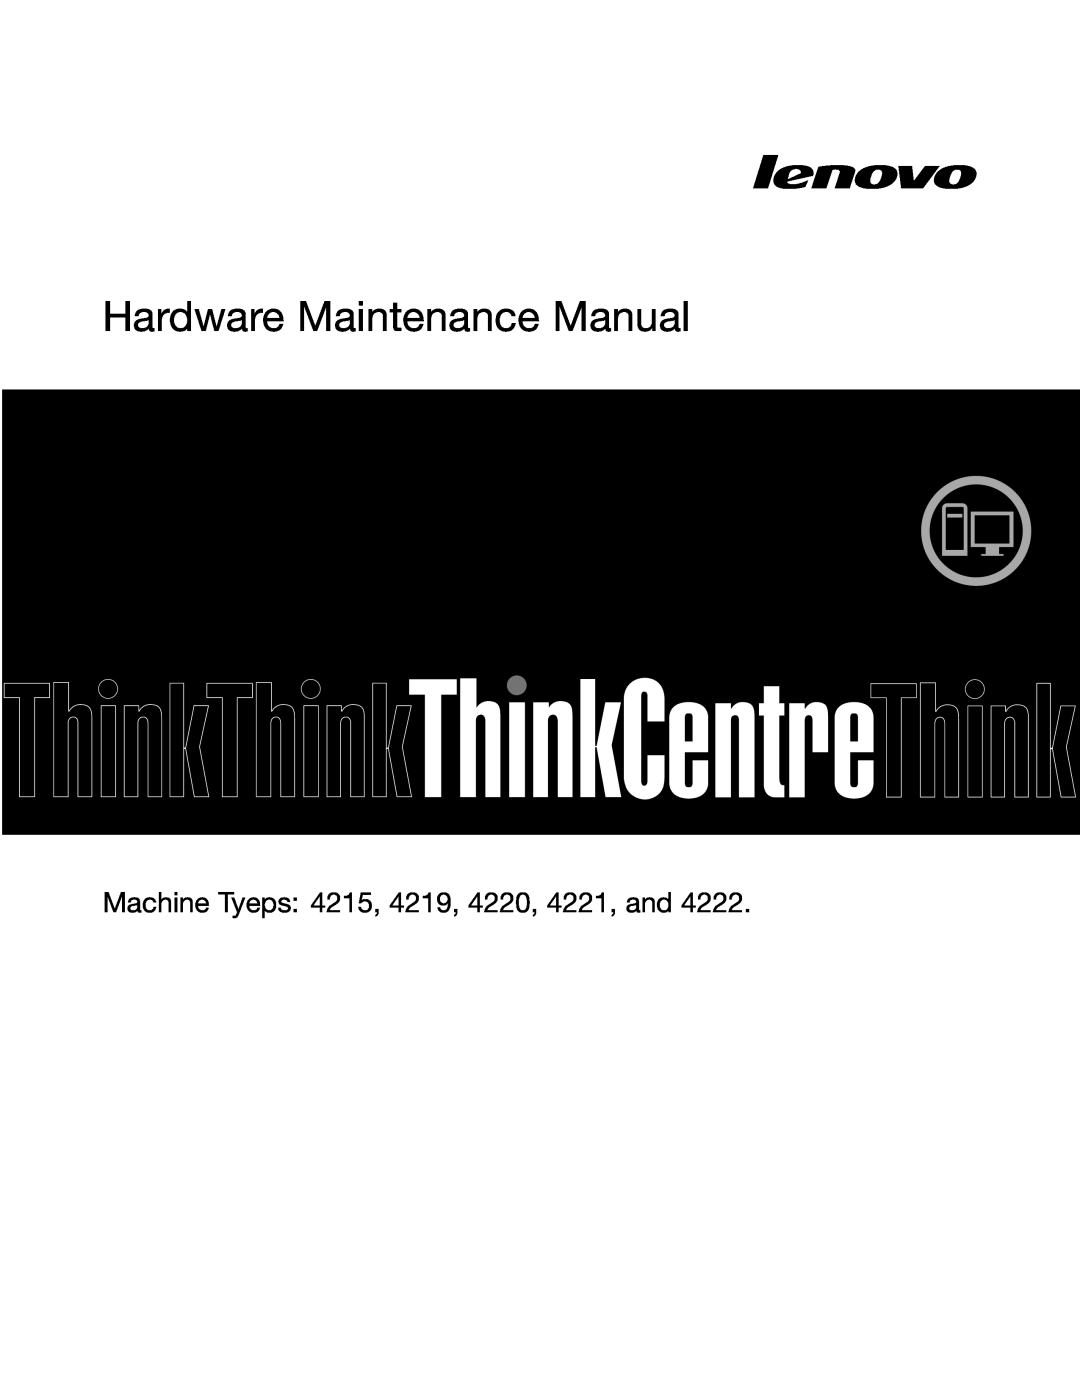 Lenovo 4222 manual ThinkStation User Guide, Machine Types: 4215, 4219, 4220, 4221, and 